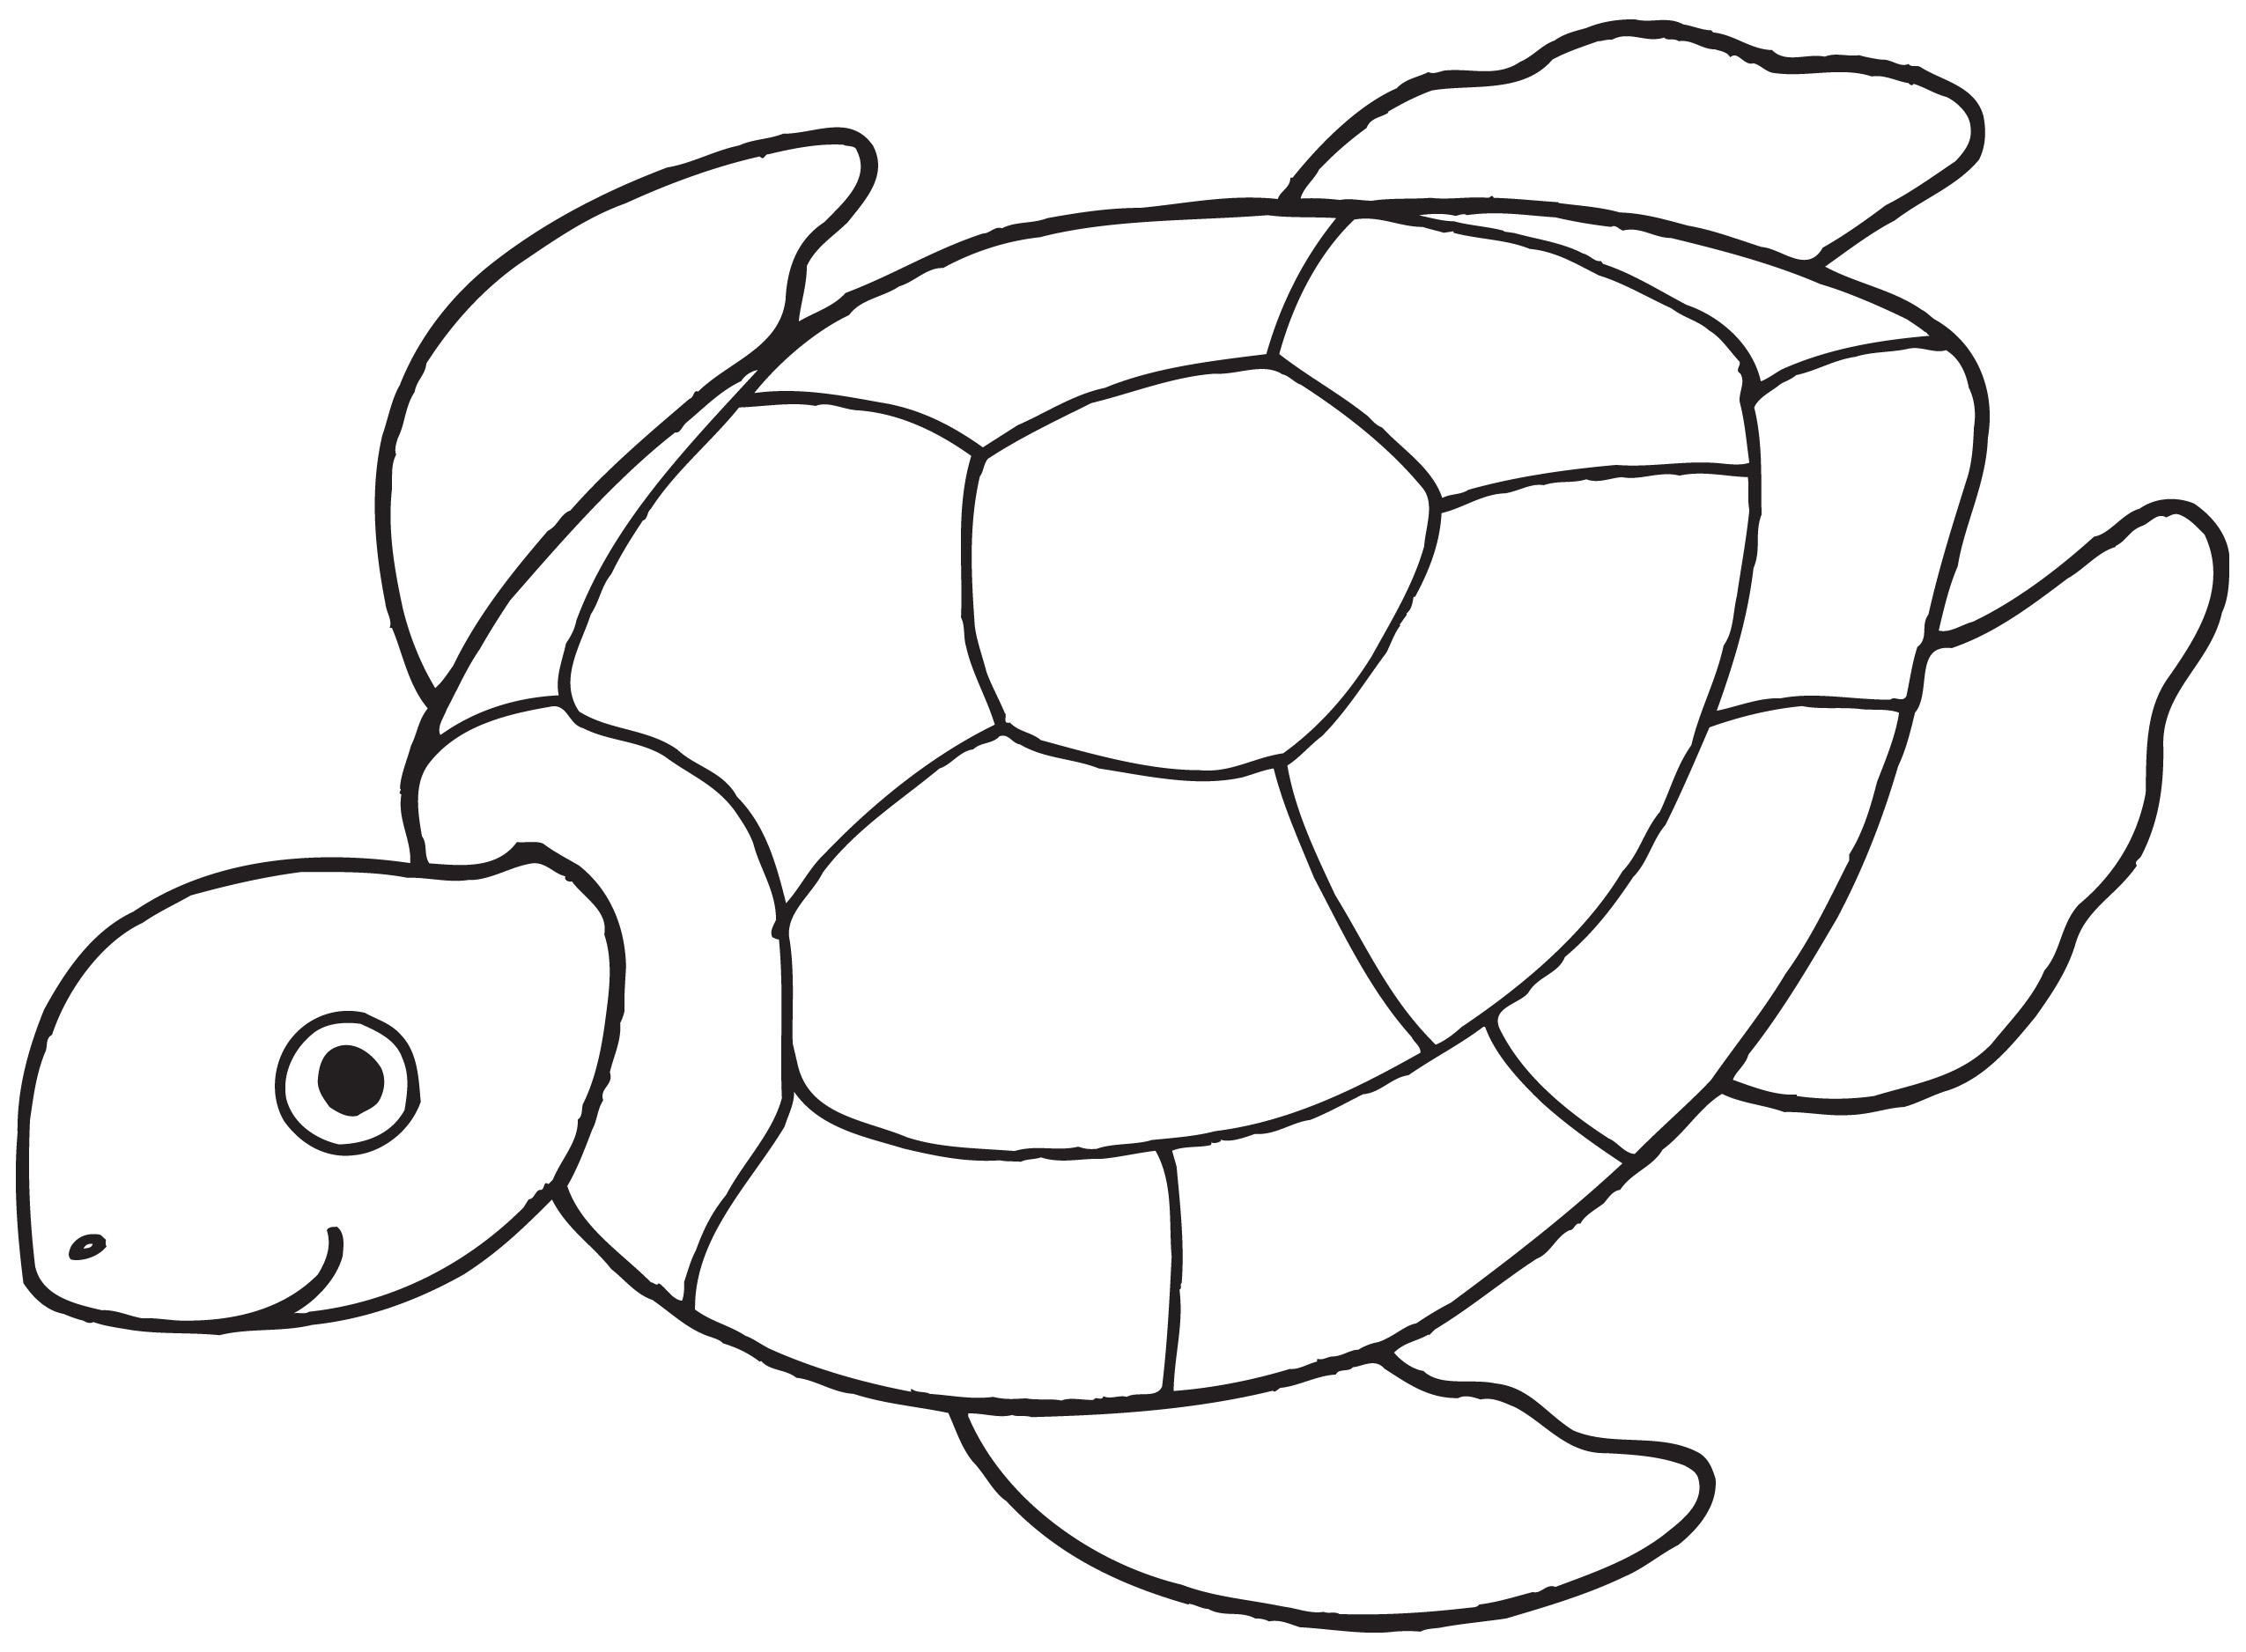 Free Black And White Sea Turtle Clipart   Clipart Best